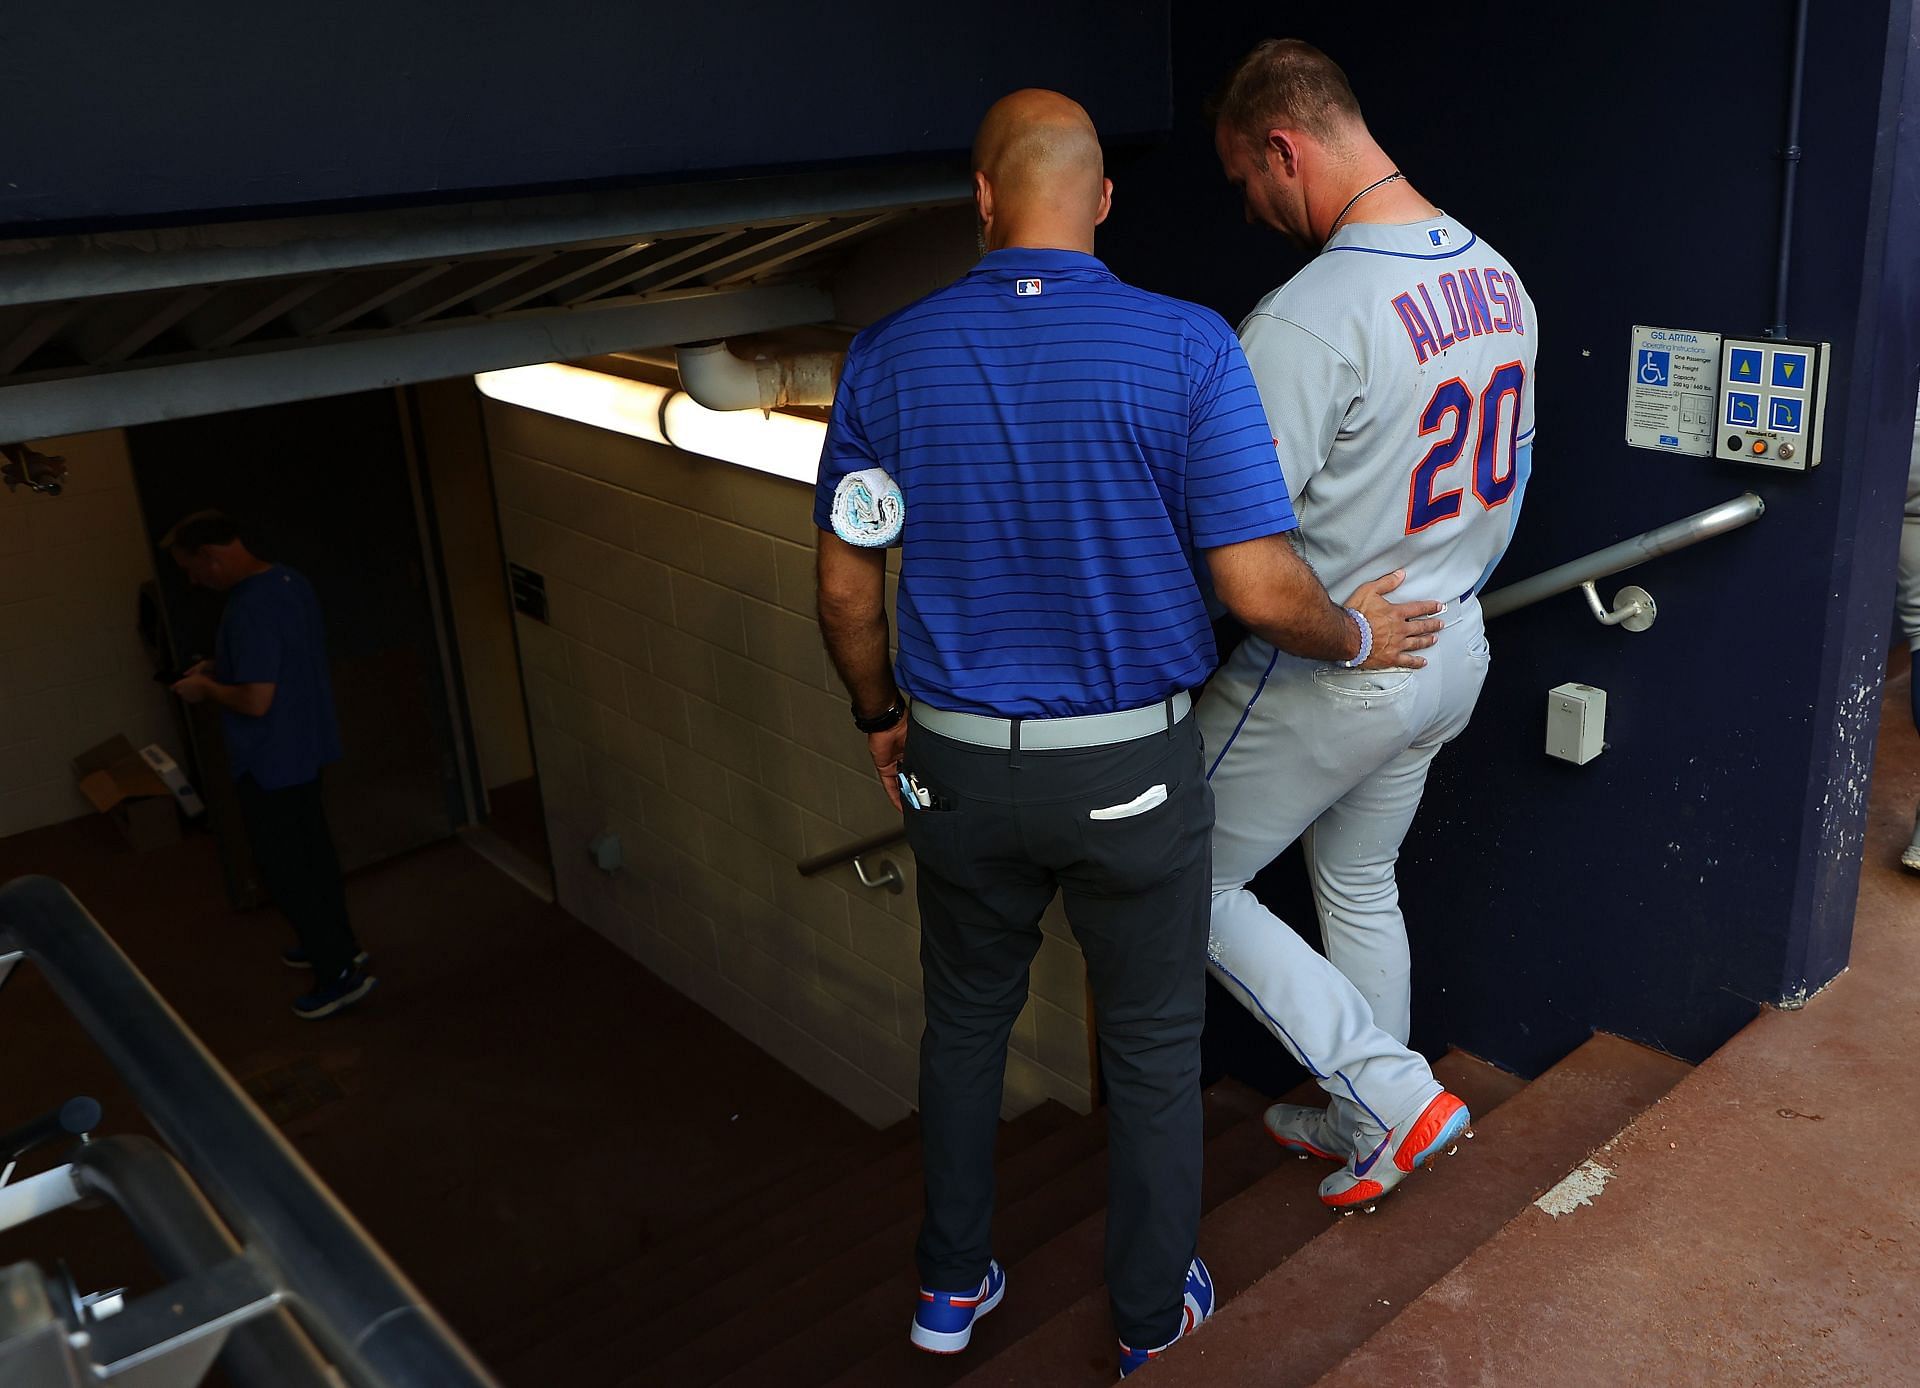 Pete Alonso #20 of the New York Mets walks to the clubhouse with a trainer after he is hit by pitch in the first inning against Charlie Morton #50 of the Atlanta Braves at Truist Park on June 07, 2023